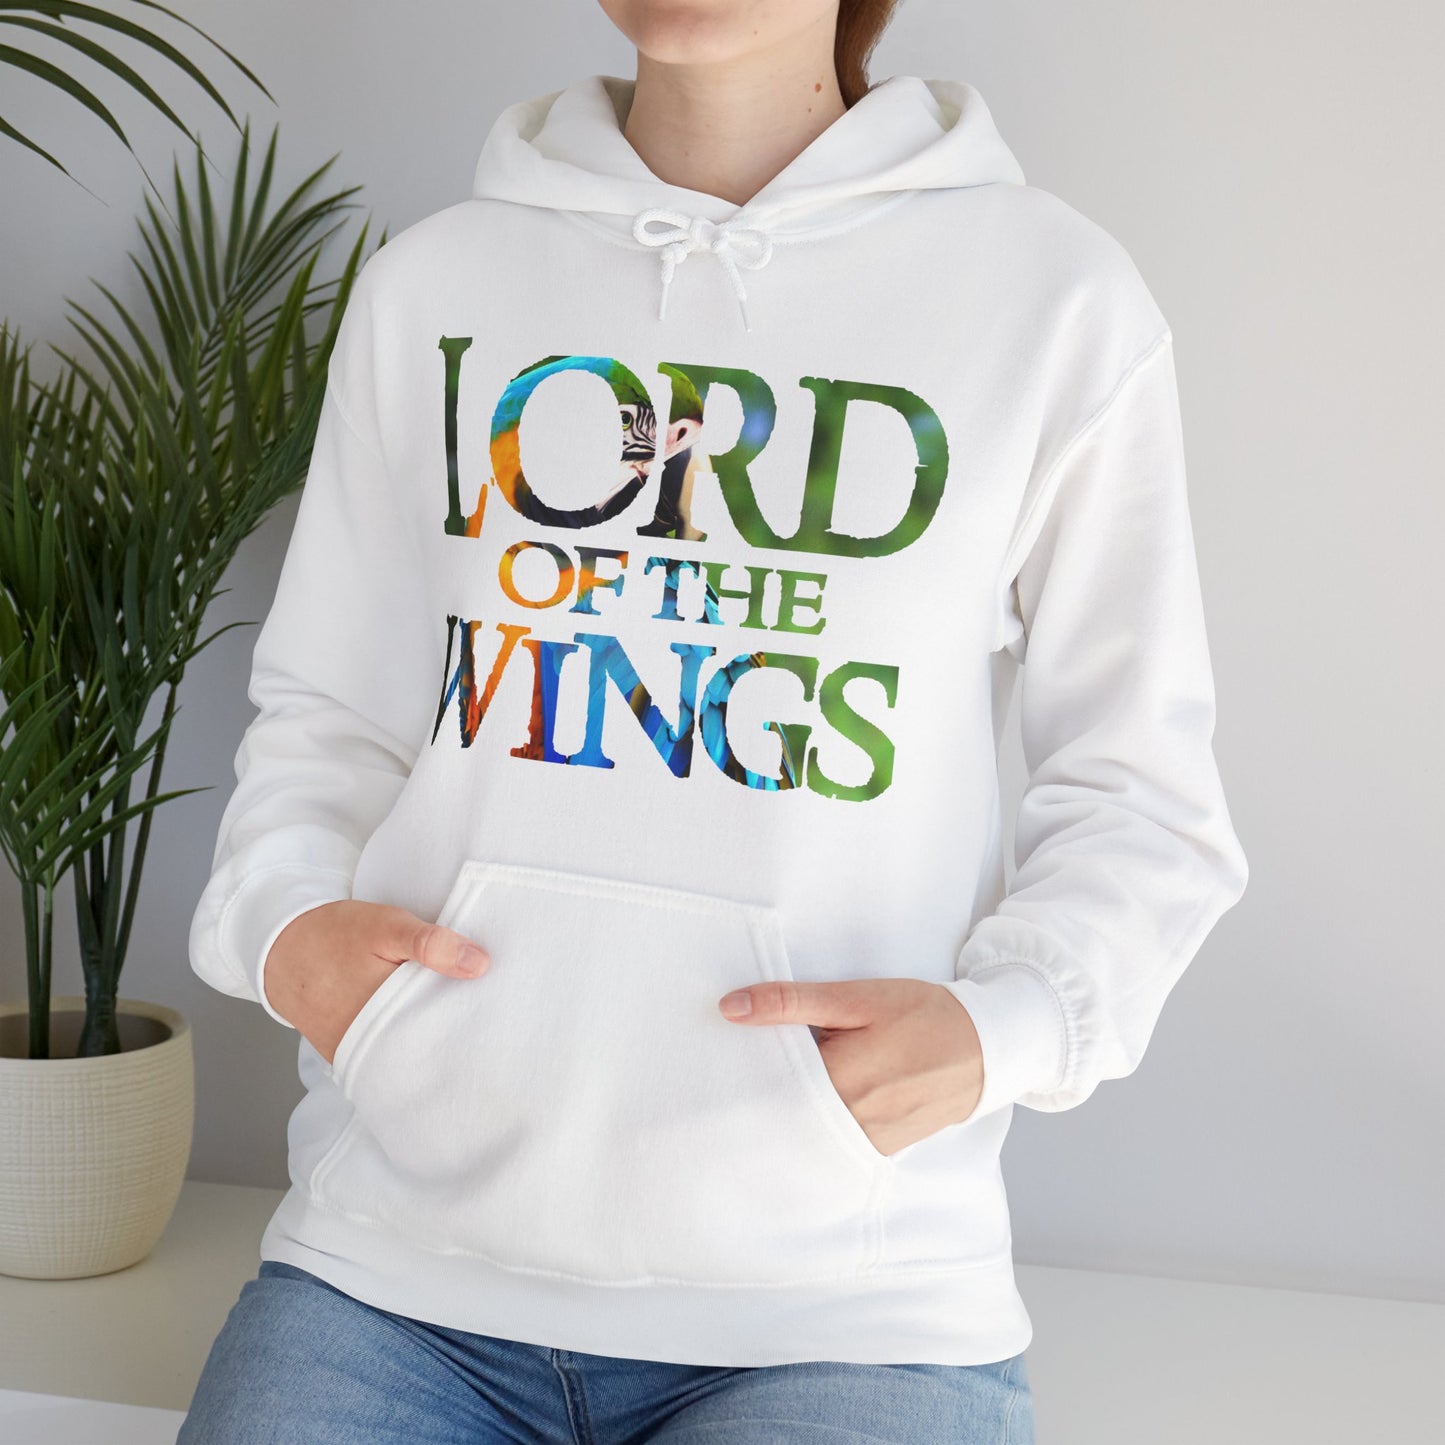 LOTW Special Hoodie - Limited Time Only